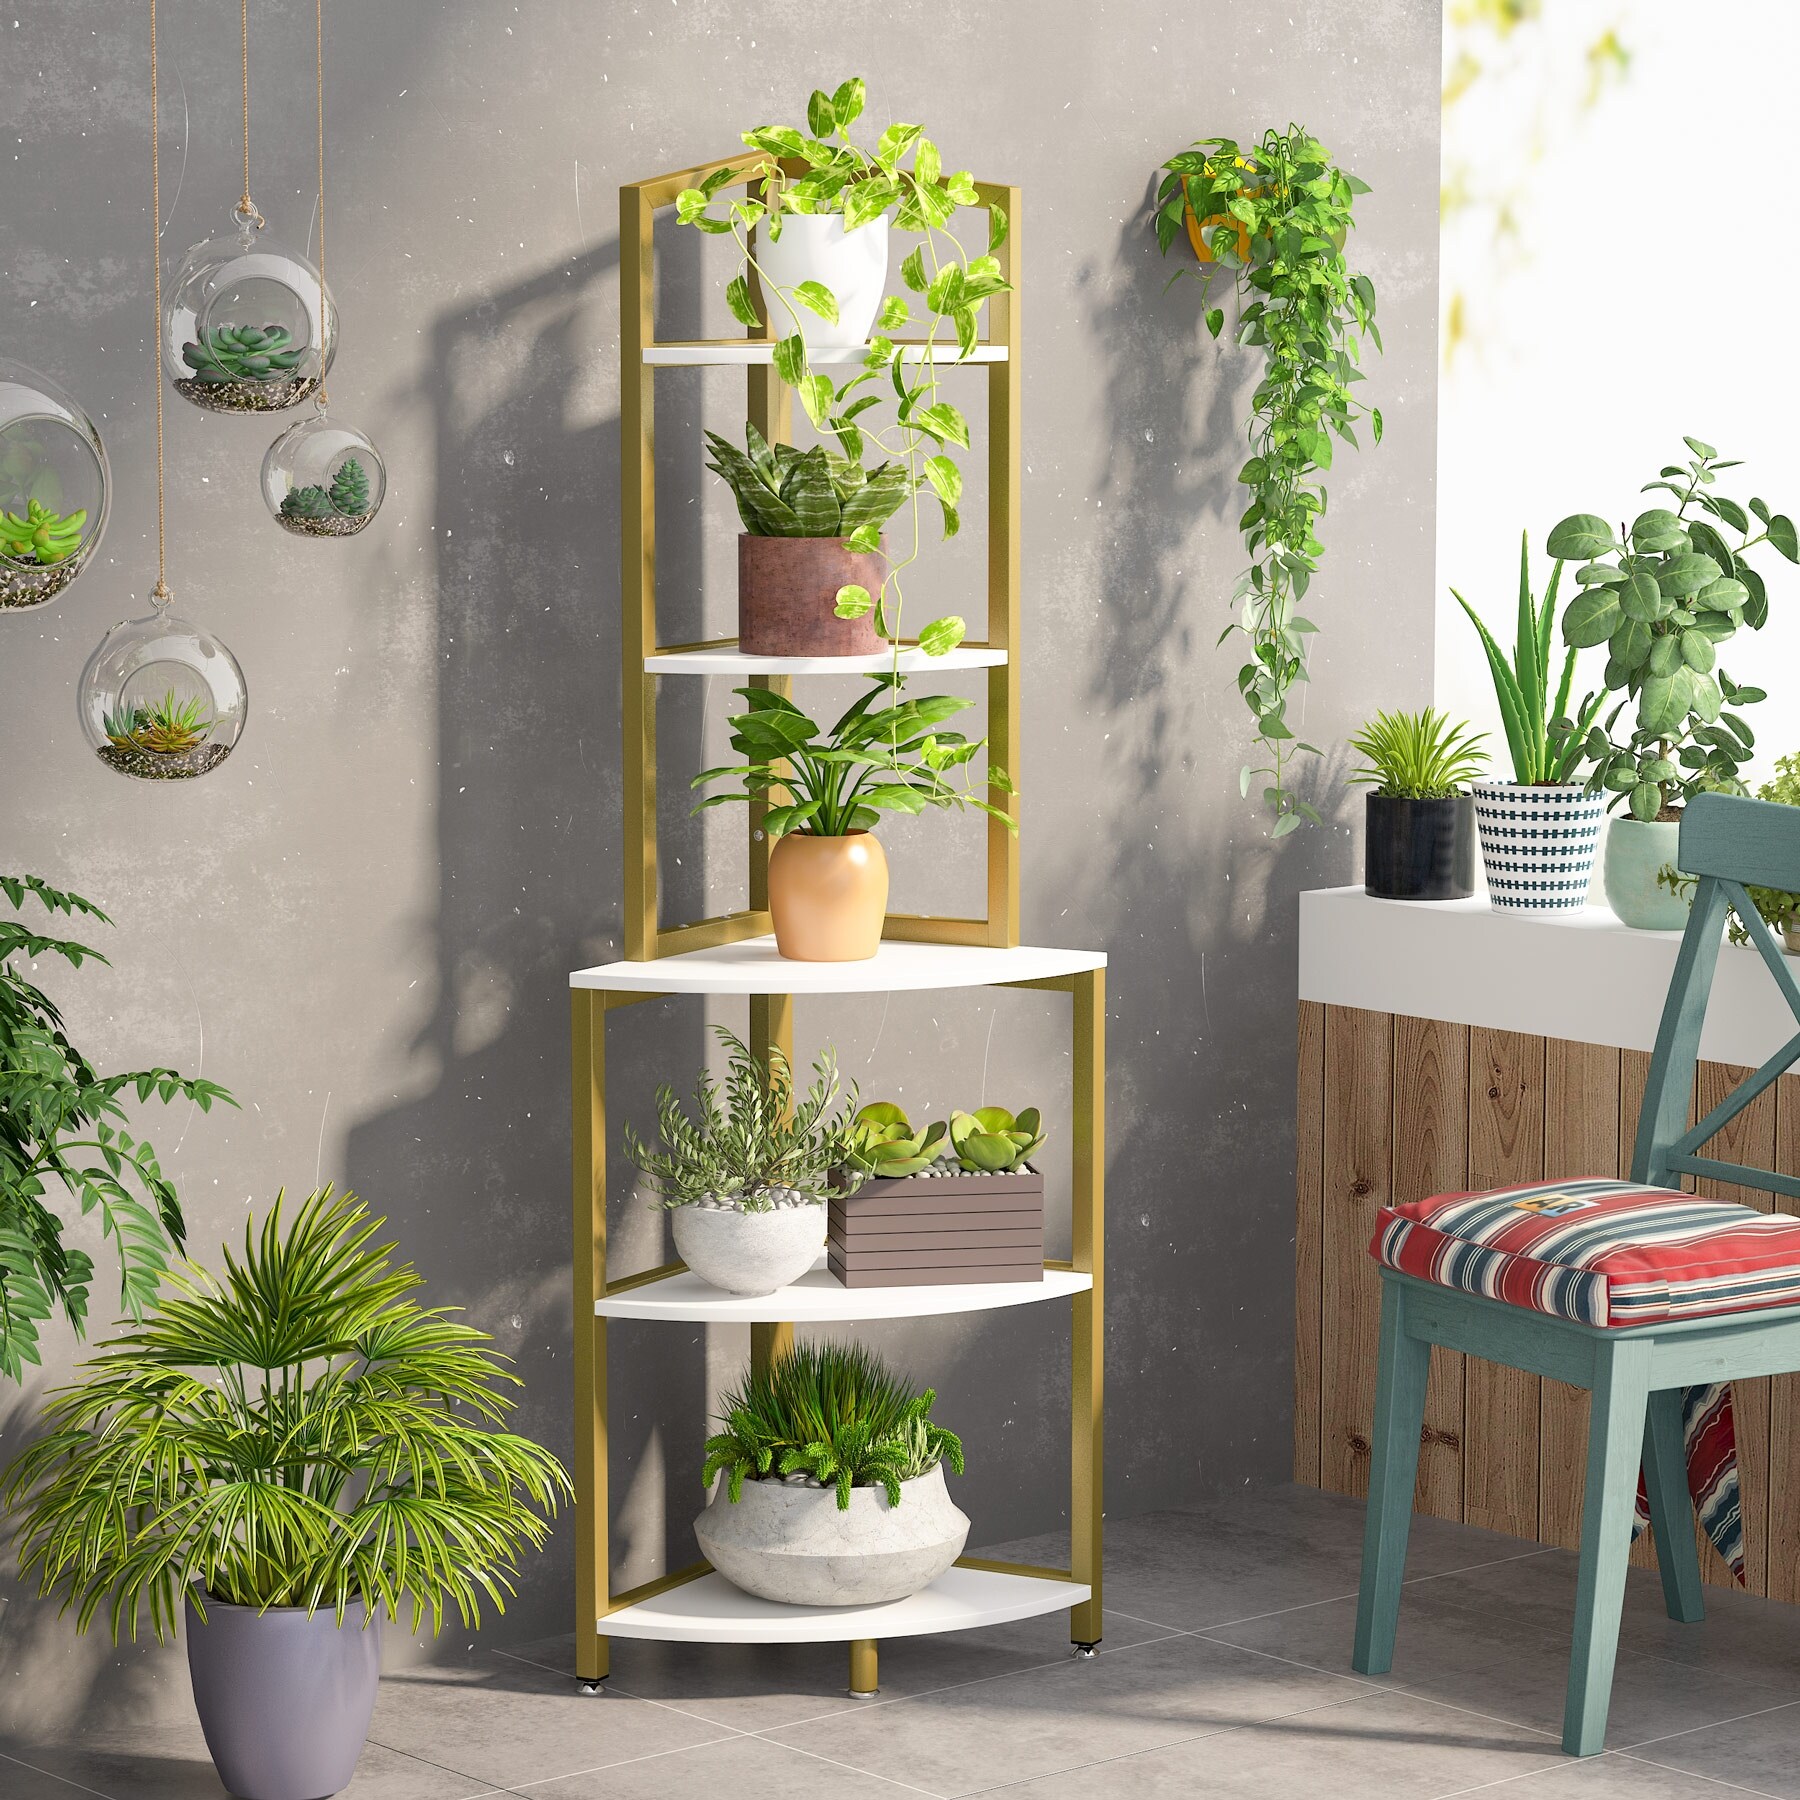 https://ak1.ostkcdn.com/images/products/is/images/direct/78f3937e16d13c58ab7102e7bad15e69be78f64d/5-Tier-Corner-Shelf%2C-60-Inch-Bookcase-for-Living-Room%2C-Industrial-Corner-Storage-Rack-Plant-Stand-for-Home-Office.jpg